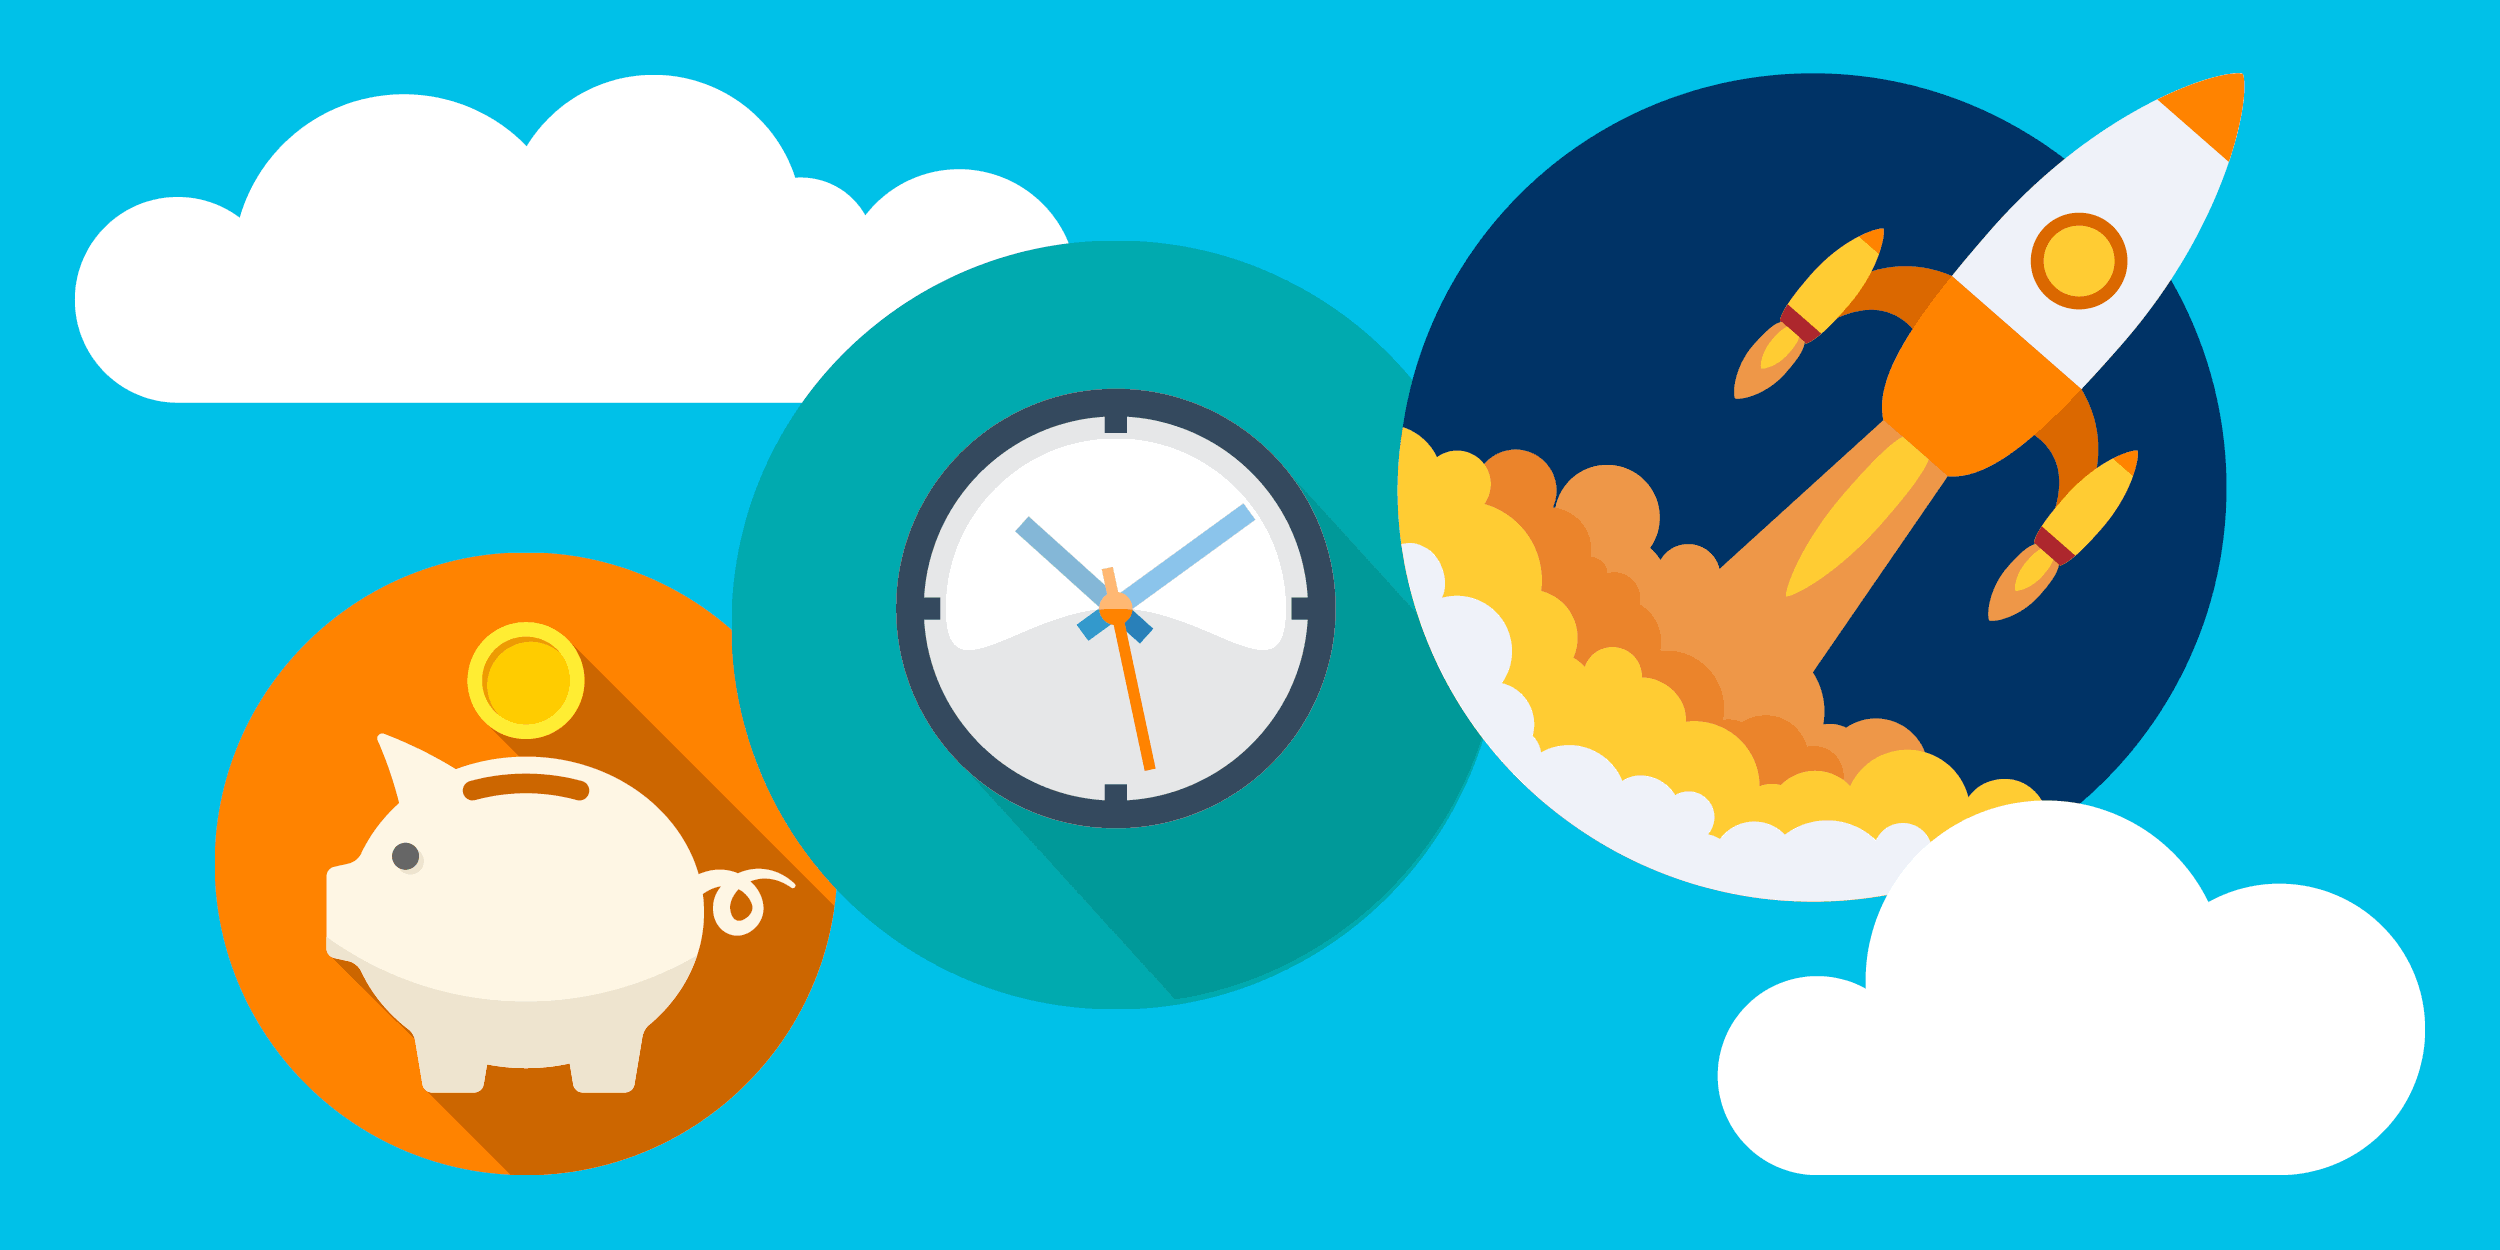 illustration of a piggy bank, a clock, and a rocket ship blasting off,  symbolizing how nonprofits can save time and money using cloud products together